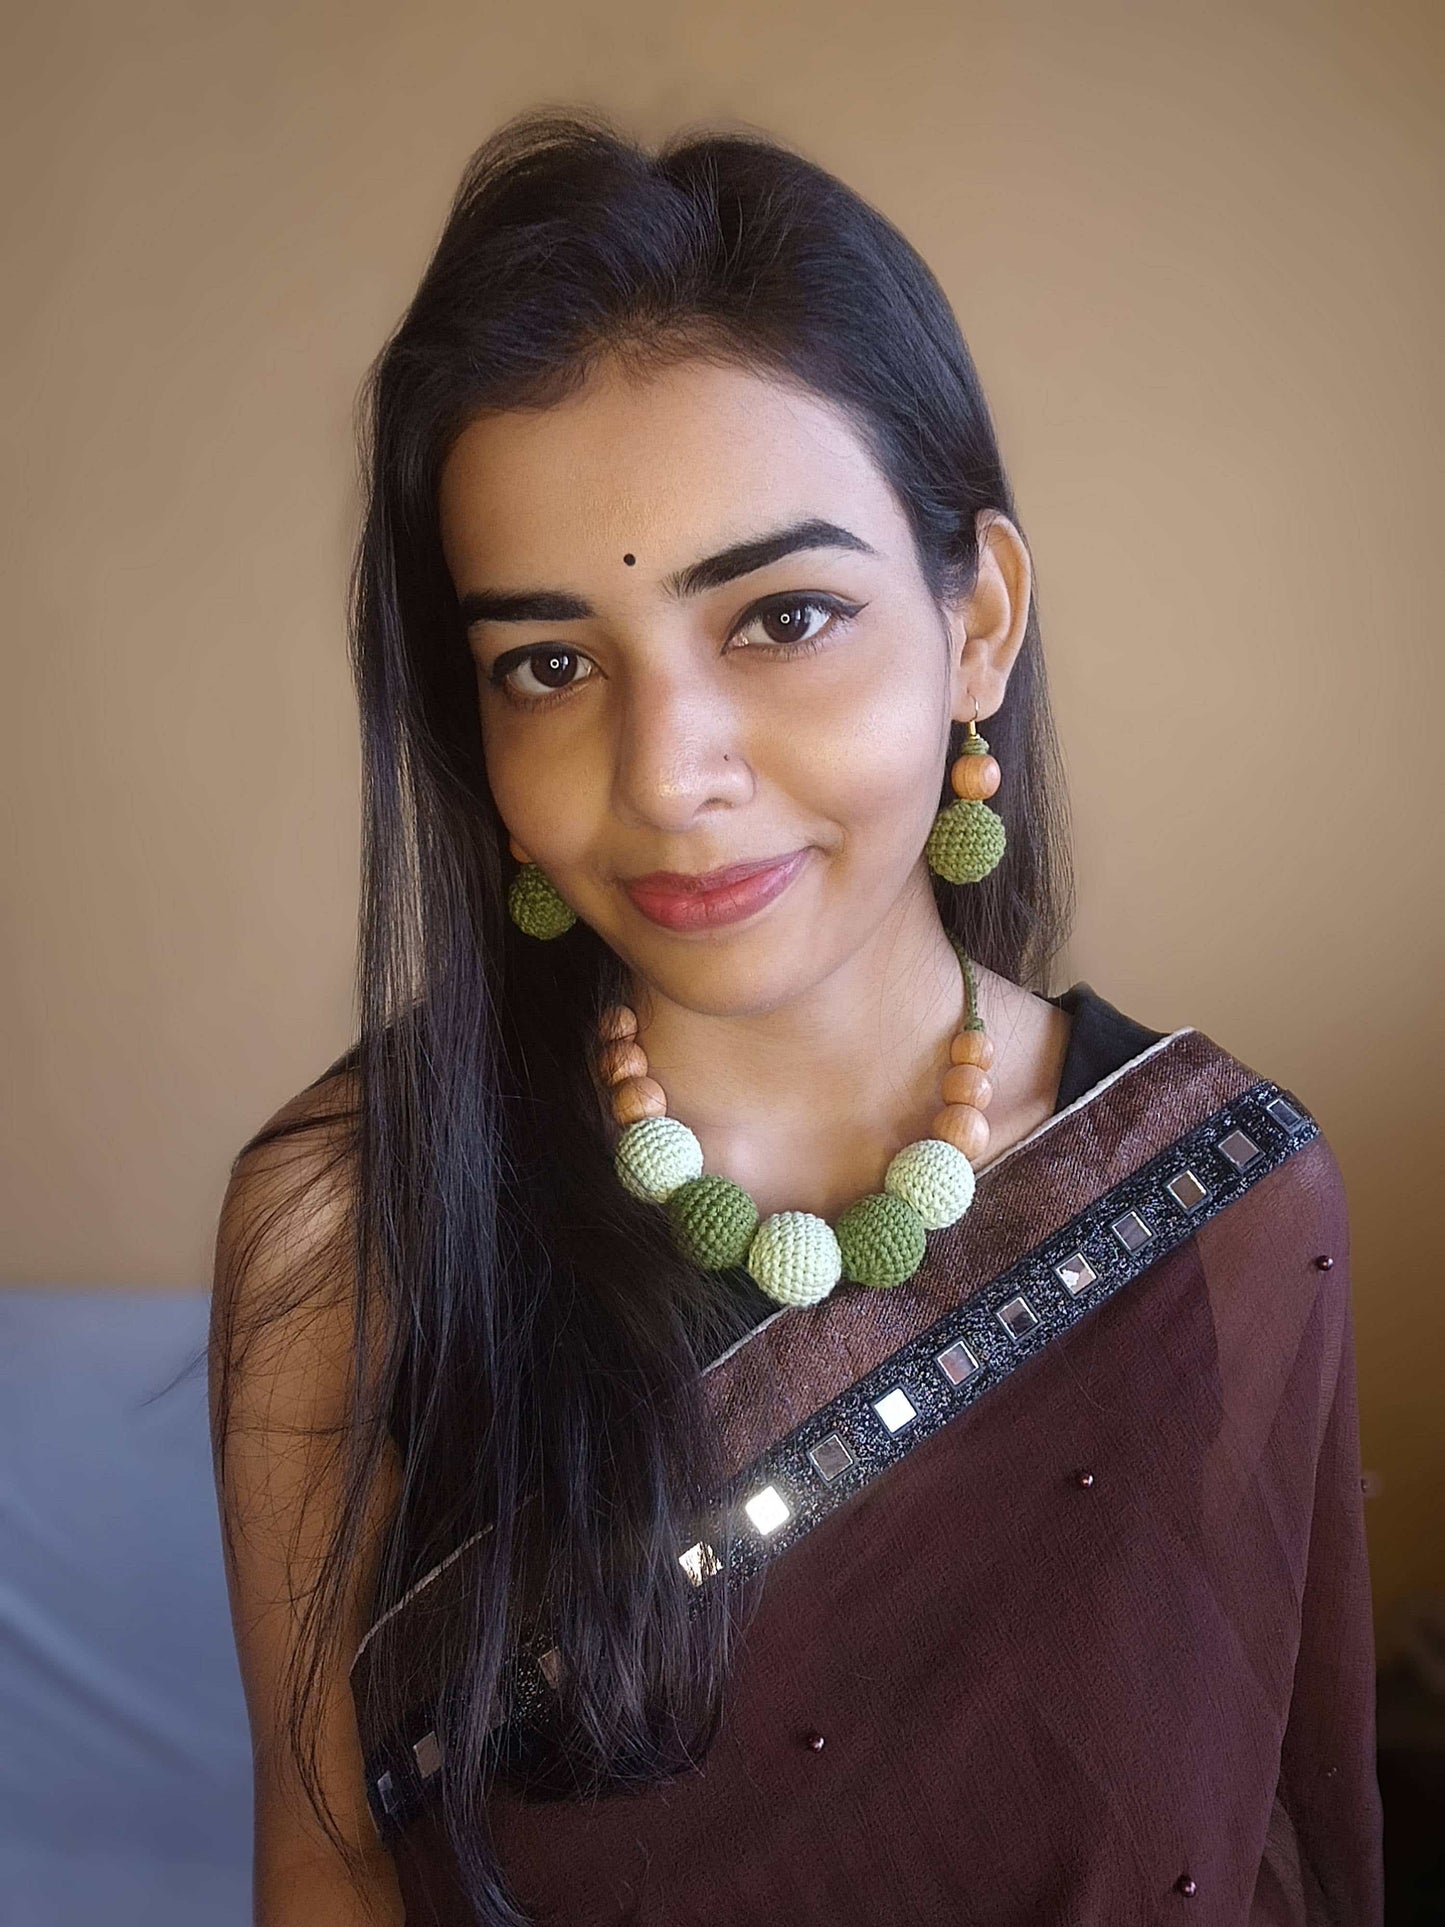 Indian woman in brown saree wearing Dark and light green crochet round beads choker necklace and earrings